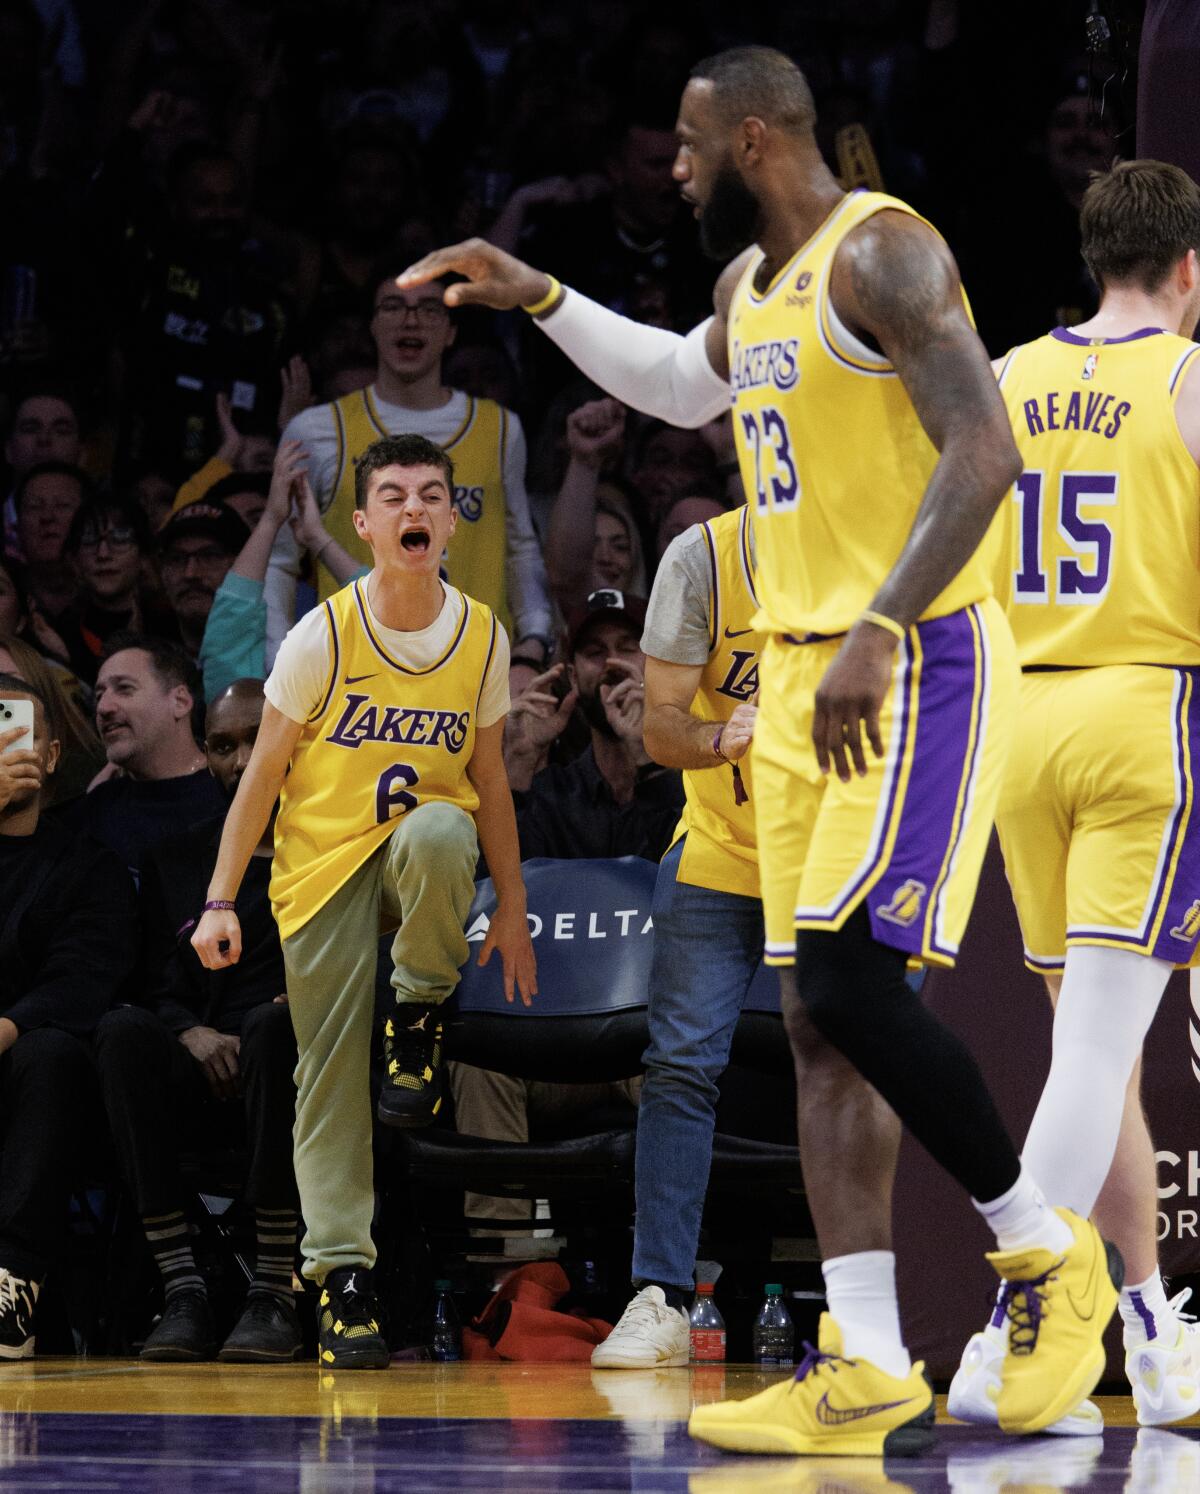 A young Lakers fan reacts after Lakers star LeBron James scores against the Oklahoma Thunder.